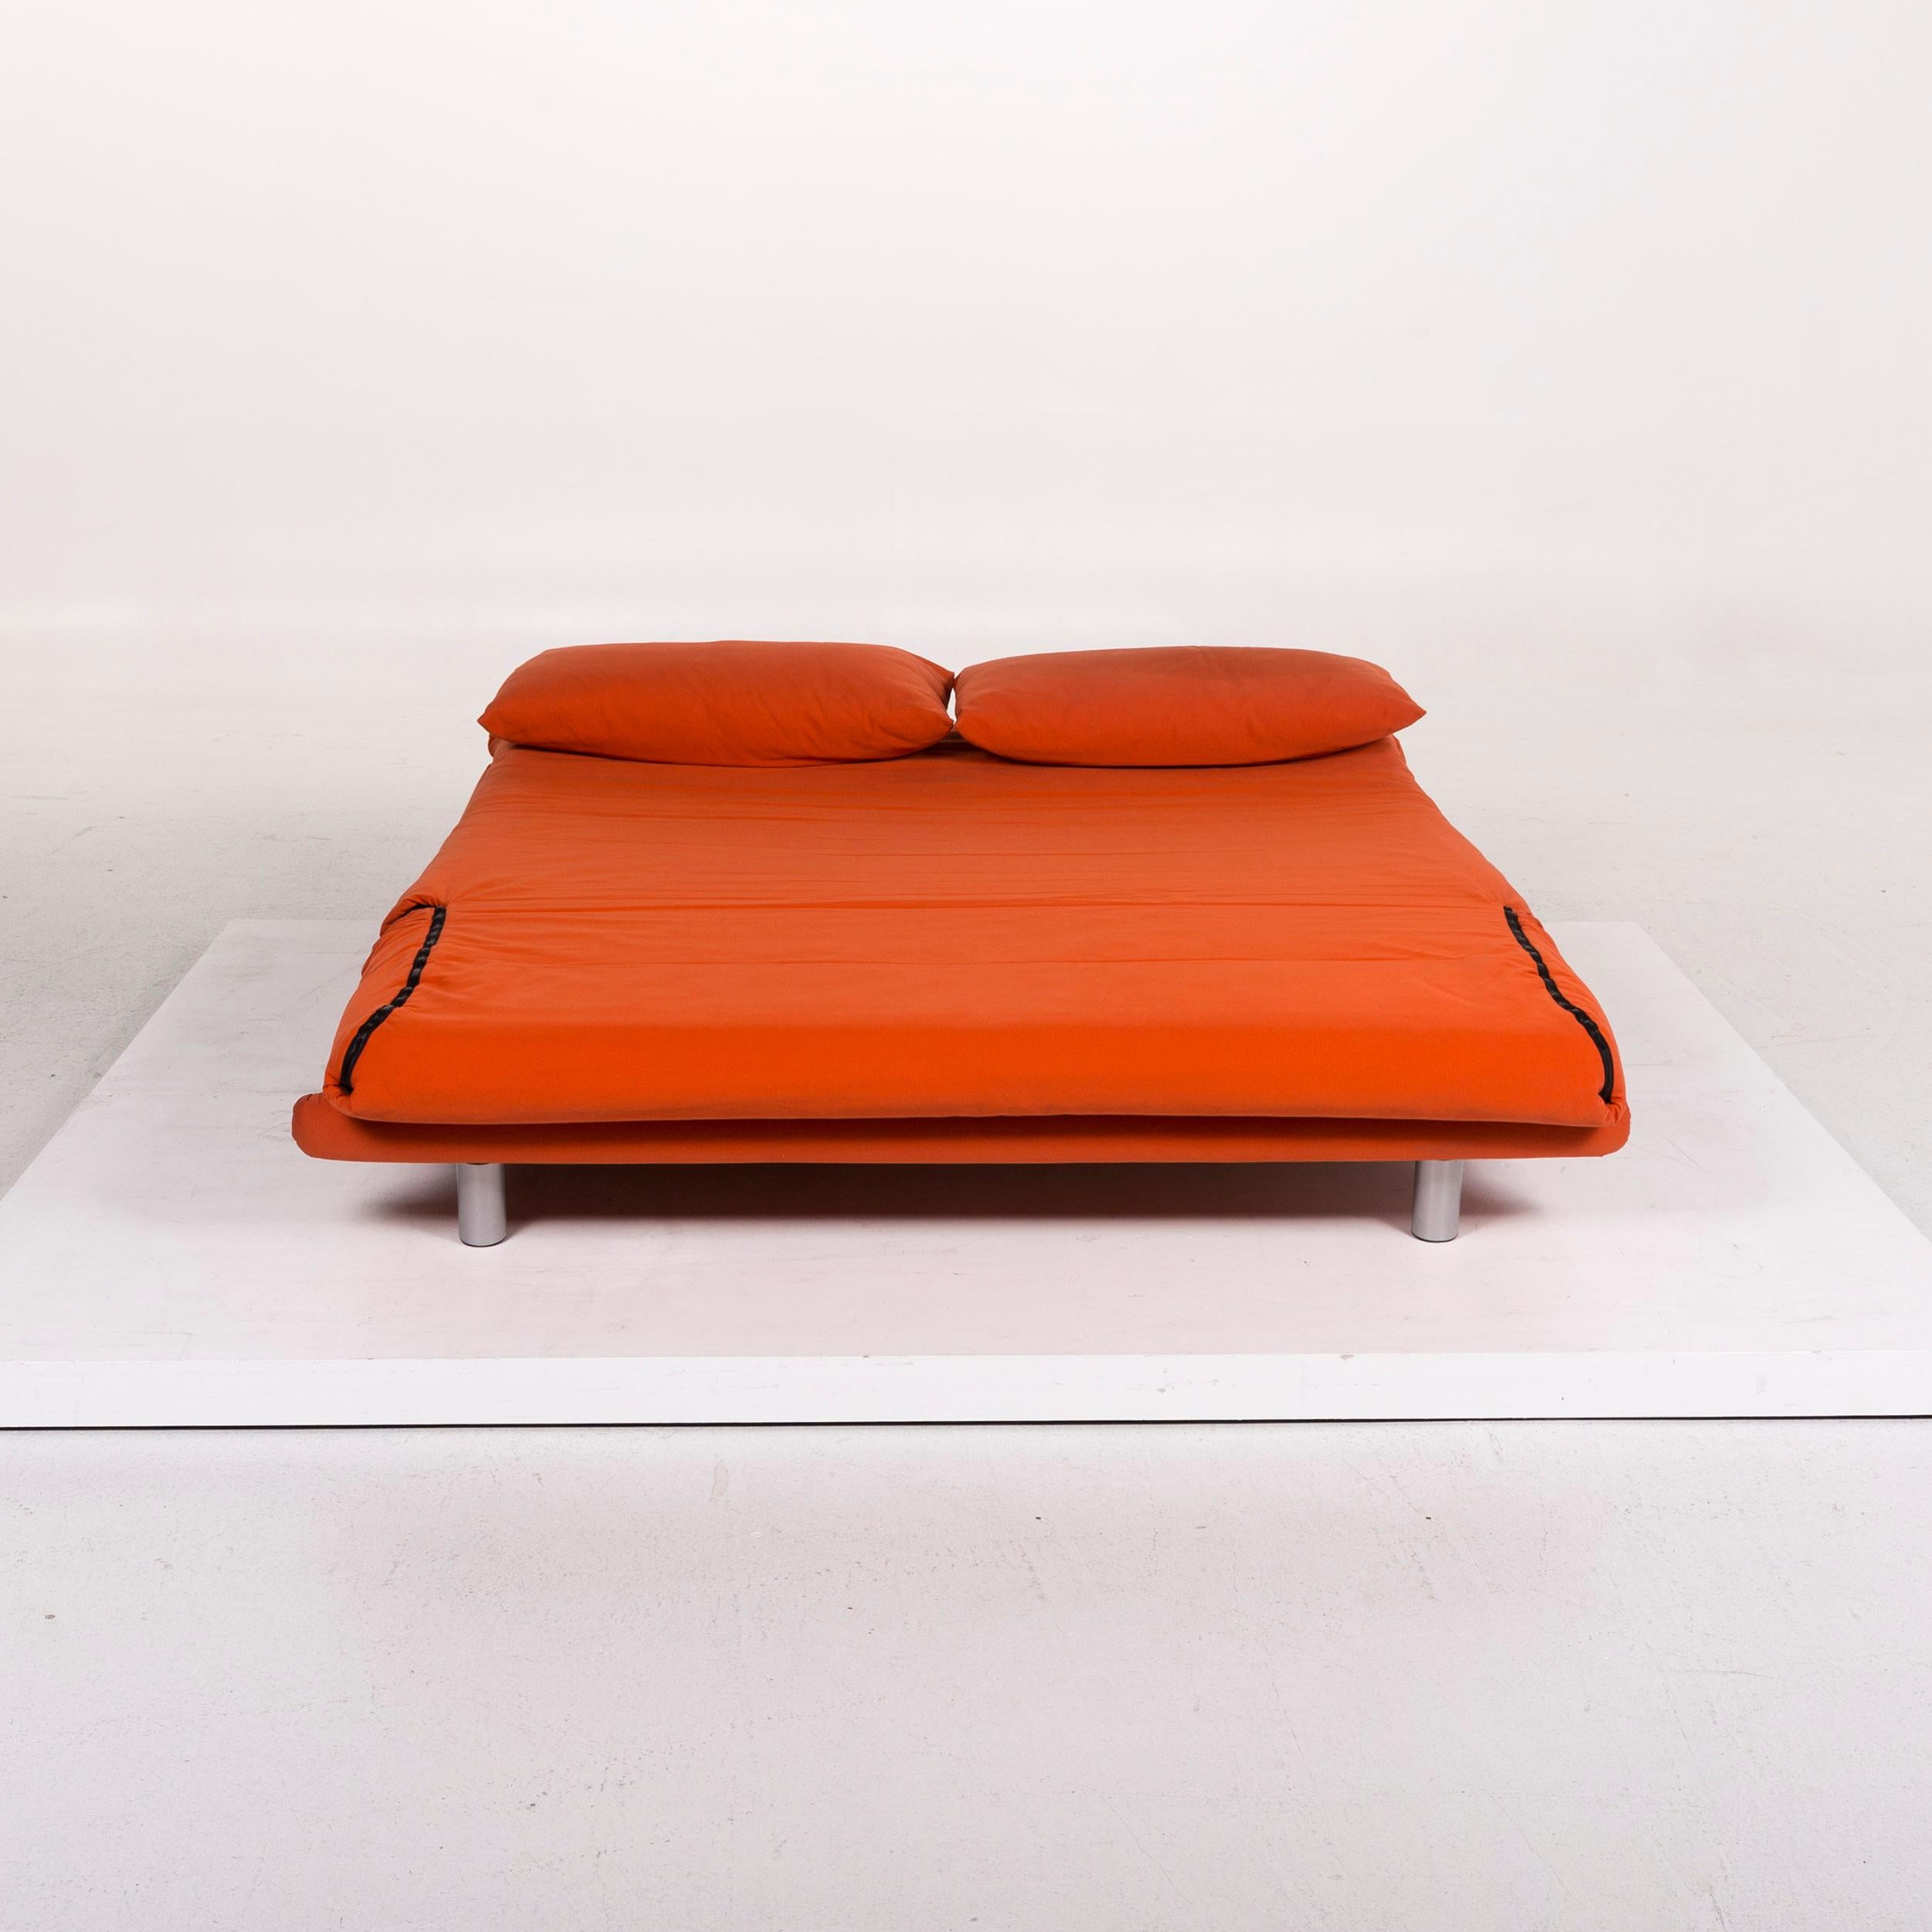 We bring to you a Ligne Roset multy fabric sofa bed orange sofa two-seat sleep function.

 

 Product measurements in centimeters:
 

Depth 101
Width 165
Height 81
Seat-height 41
Seat-depth 66
Seat-width 165
Back-height 40.
   